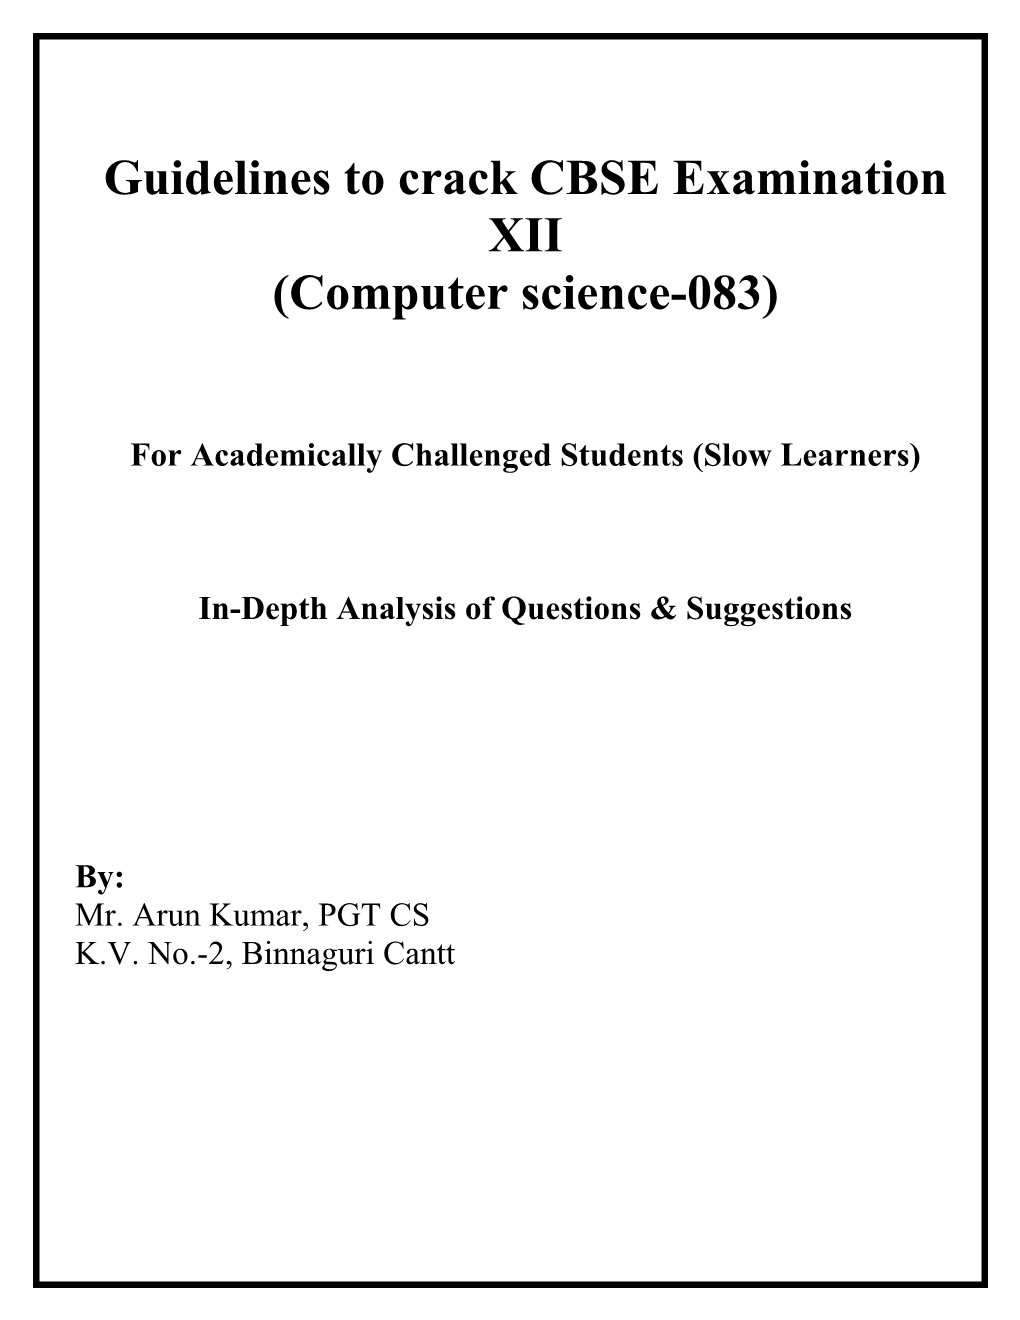 How to Crack CBSE-Examination (Computer Science)